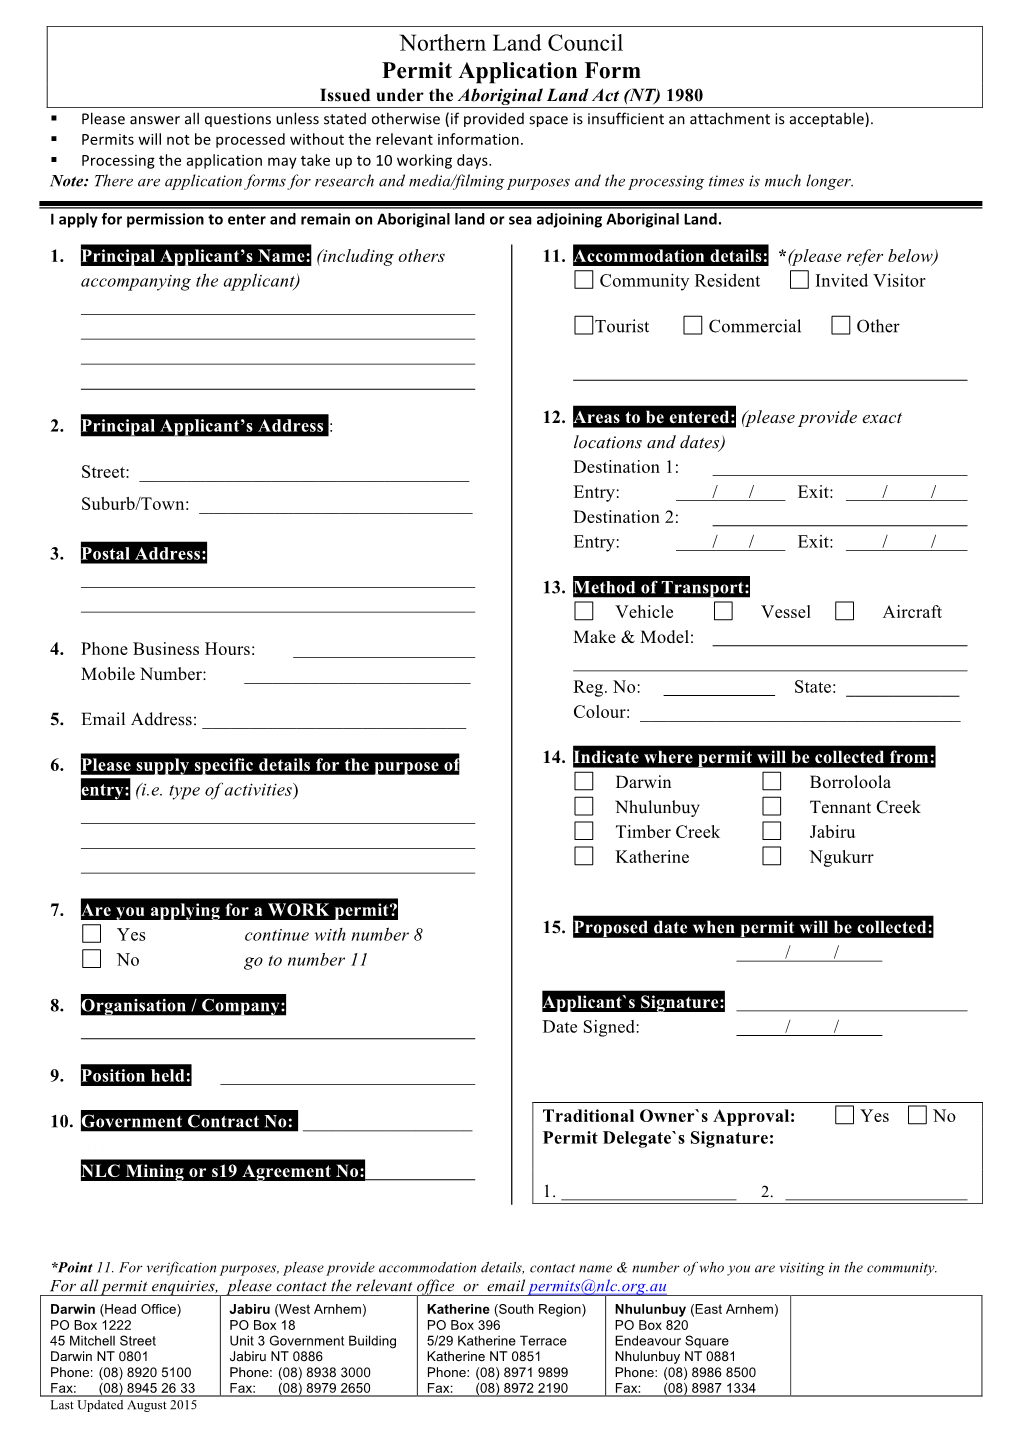 Northern Land Council Permit Application Form